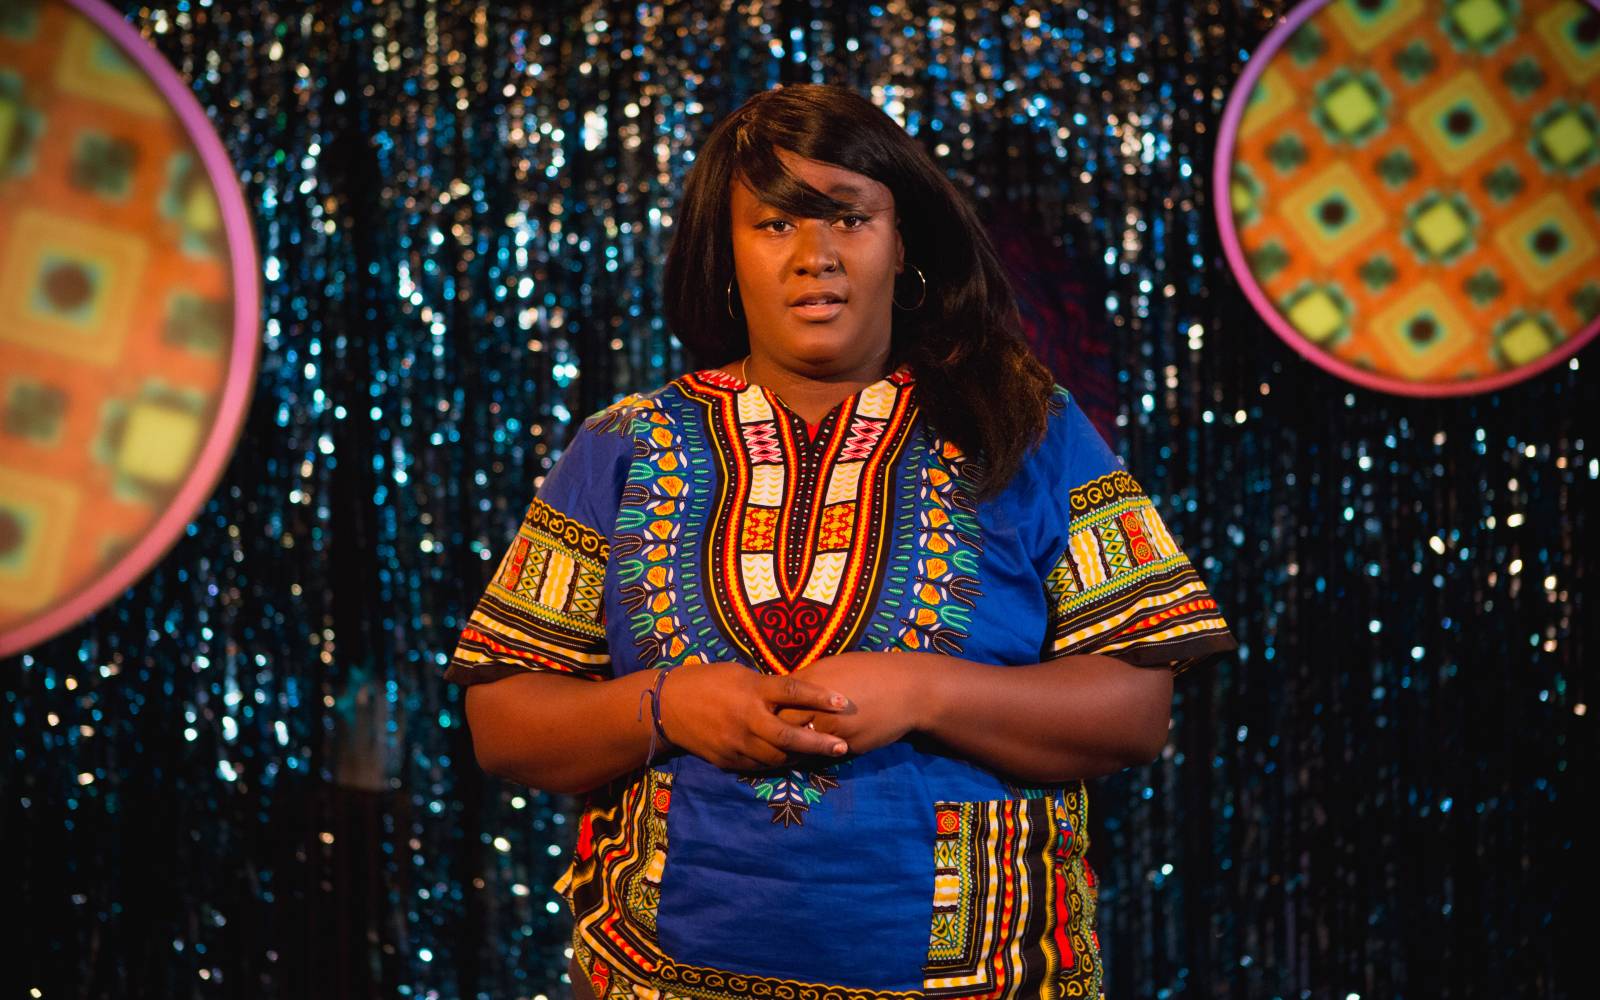 A sparkly blue tassled backdrop. A woman (Yolanda Mercy) is stood in the centre, wearing a dashiki top with bold blue, reds and yellows. Her hands are entwined in front of her and she's looking out into the audience. She's wearing large hoops in her ears and her hair is long, straight with a side fringe sweeping over her face.